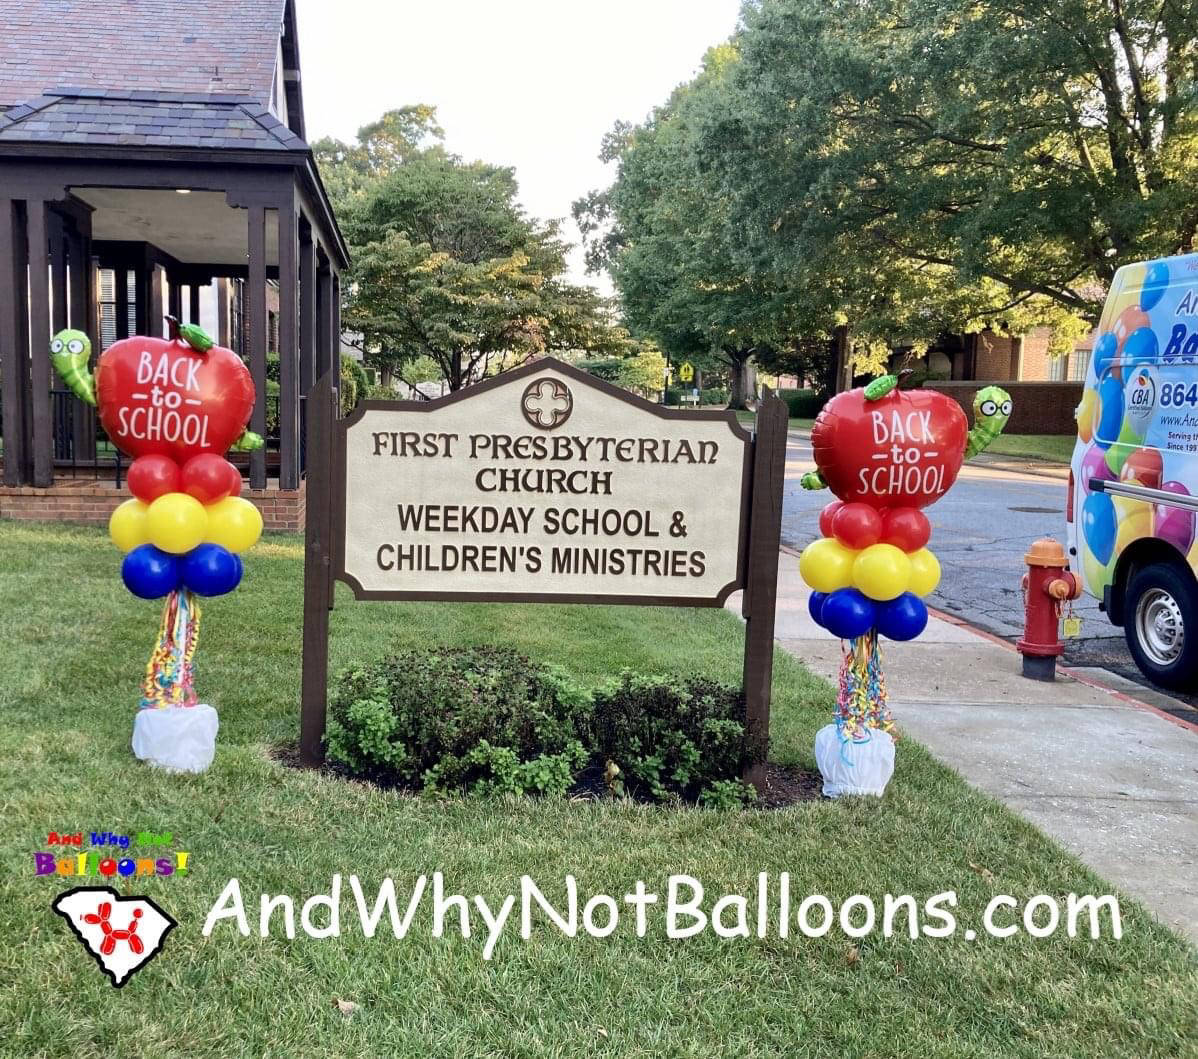 and why not balloons spartanburg sc duncan sc upstate sc balloon party poles back to school